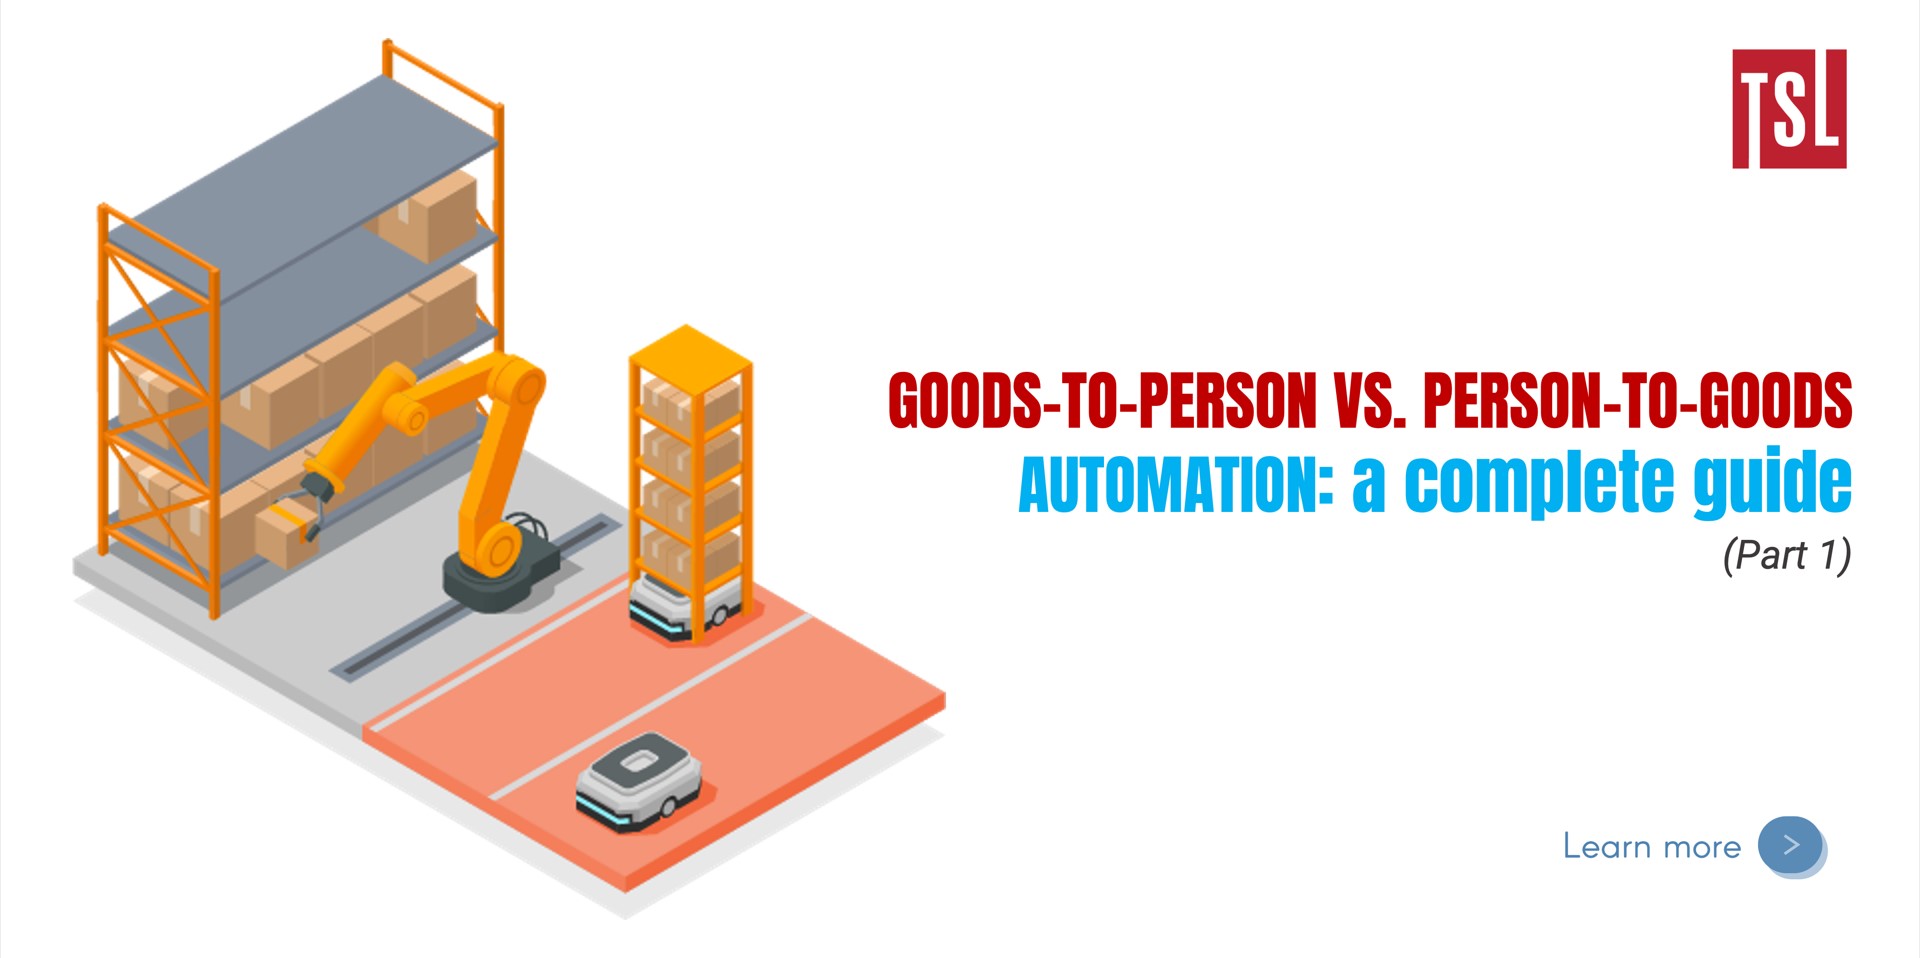 Goods-to-Person vs. Person-to-Goods Automation: A Complete Guide (Part 1)